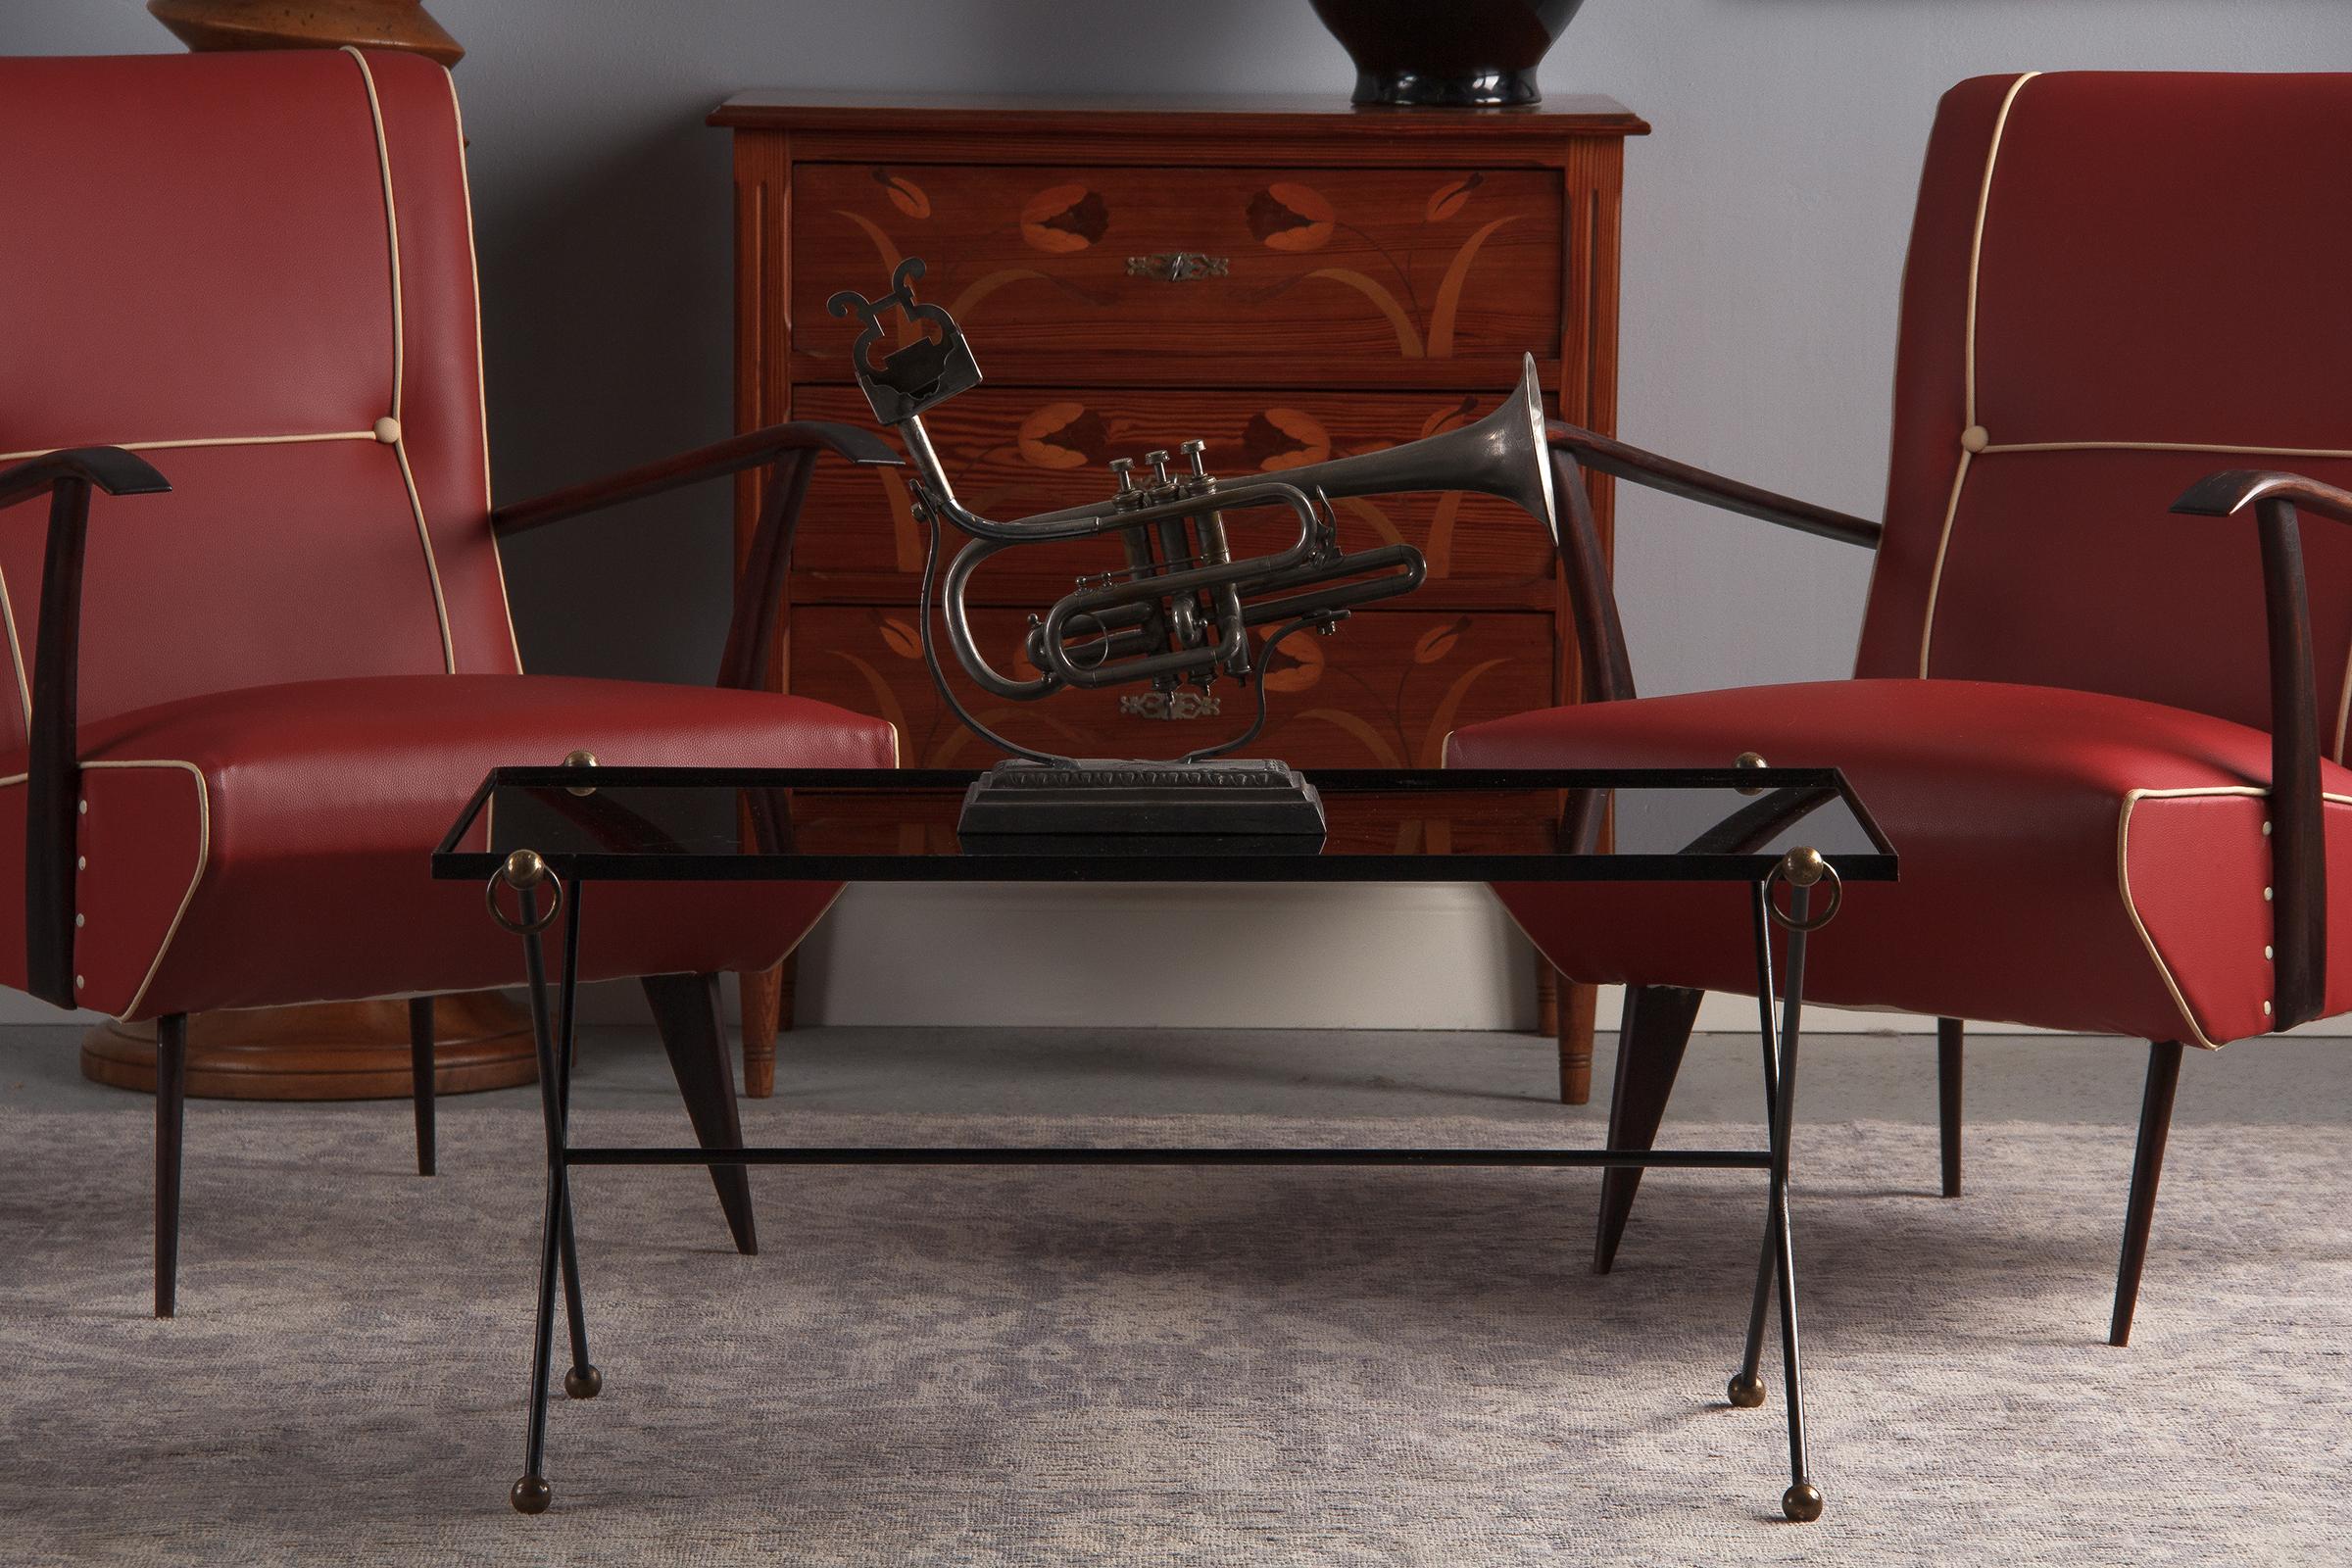 A swanky painted iron and opaque black glass coffee table attributed to Jaques Adnet, circa 1950s. Black iron bars bent into X-form legs are punctuated at top and bottom by brass balls, swinging brass loops pierce the upper balls. A single black bar